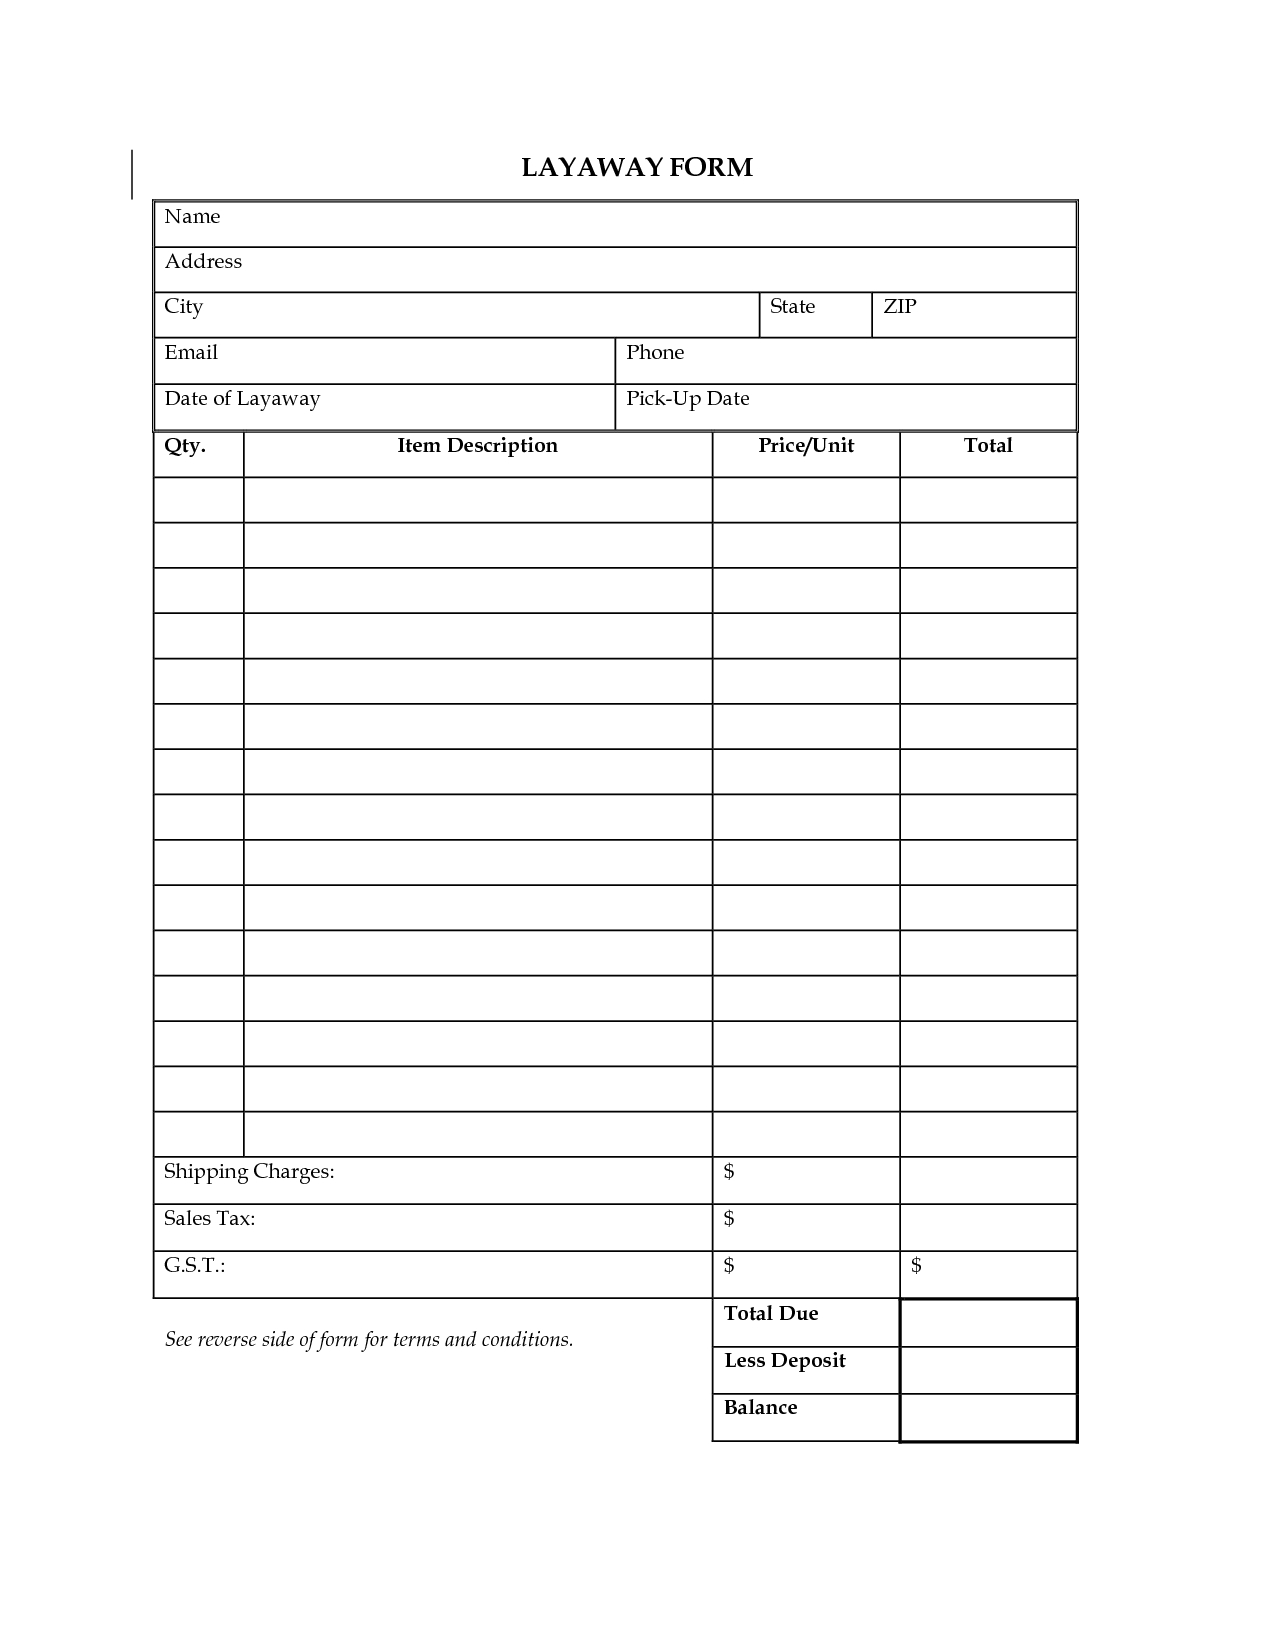 Layaway Agreement Template. Other Printable Images Gallery Category - Free Printable Layaway Forms